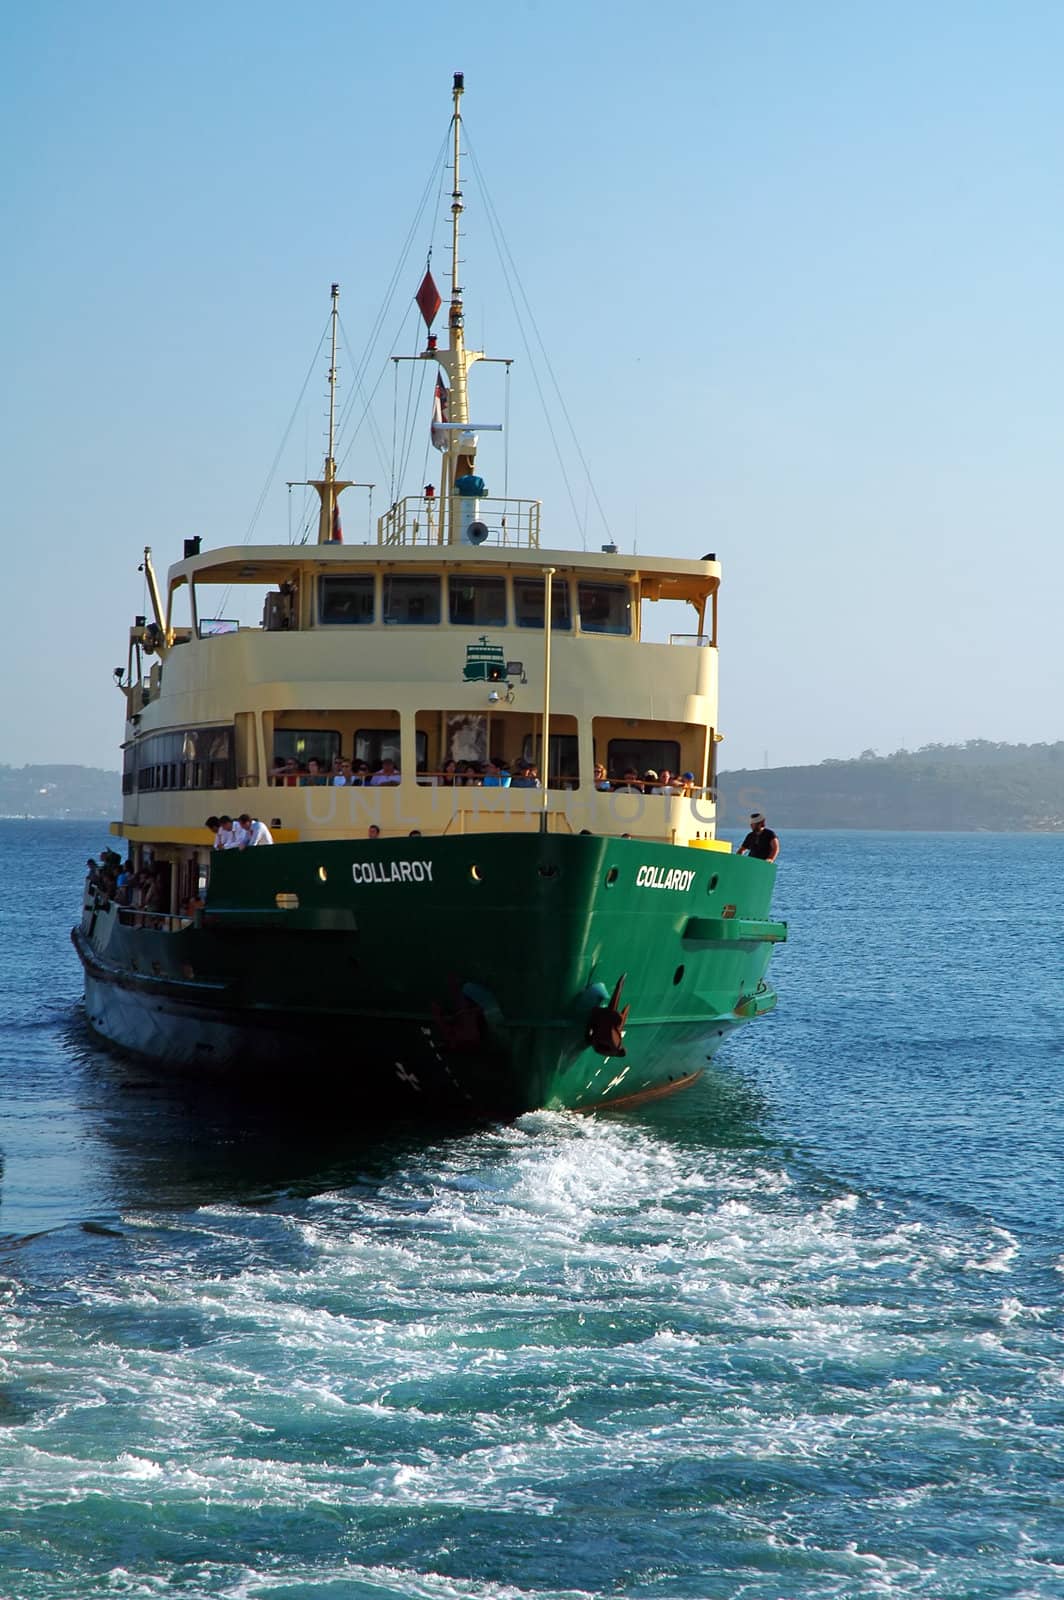 sydney ferry, green bottom, yellow top, blue sea and sky